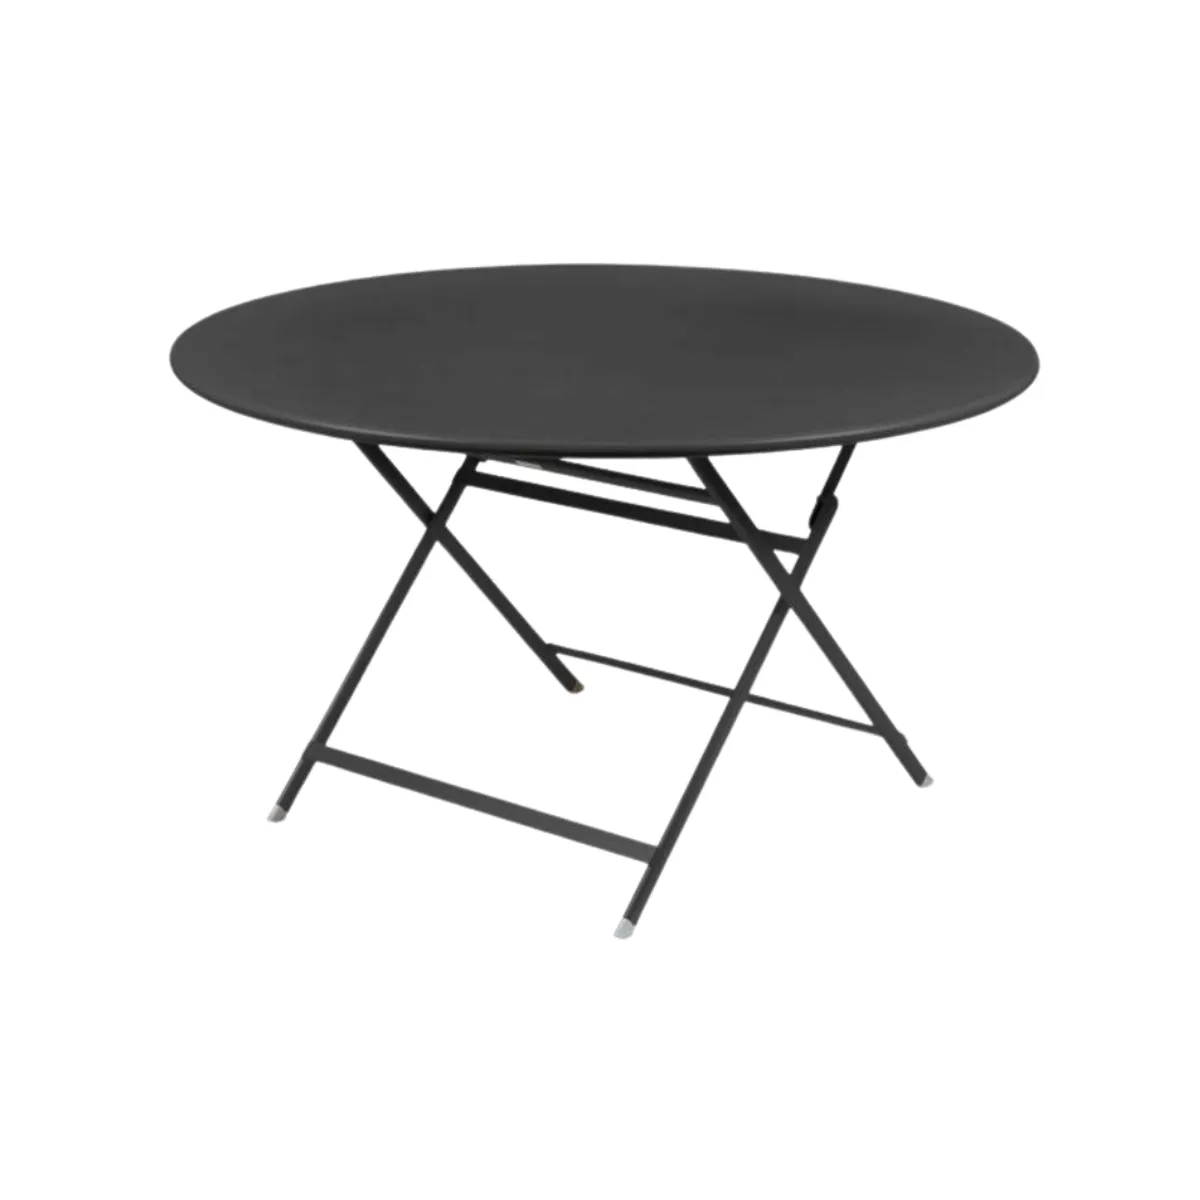 Caractere round folding table 6